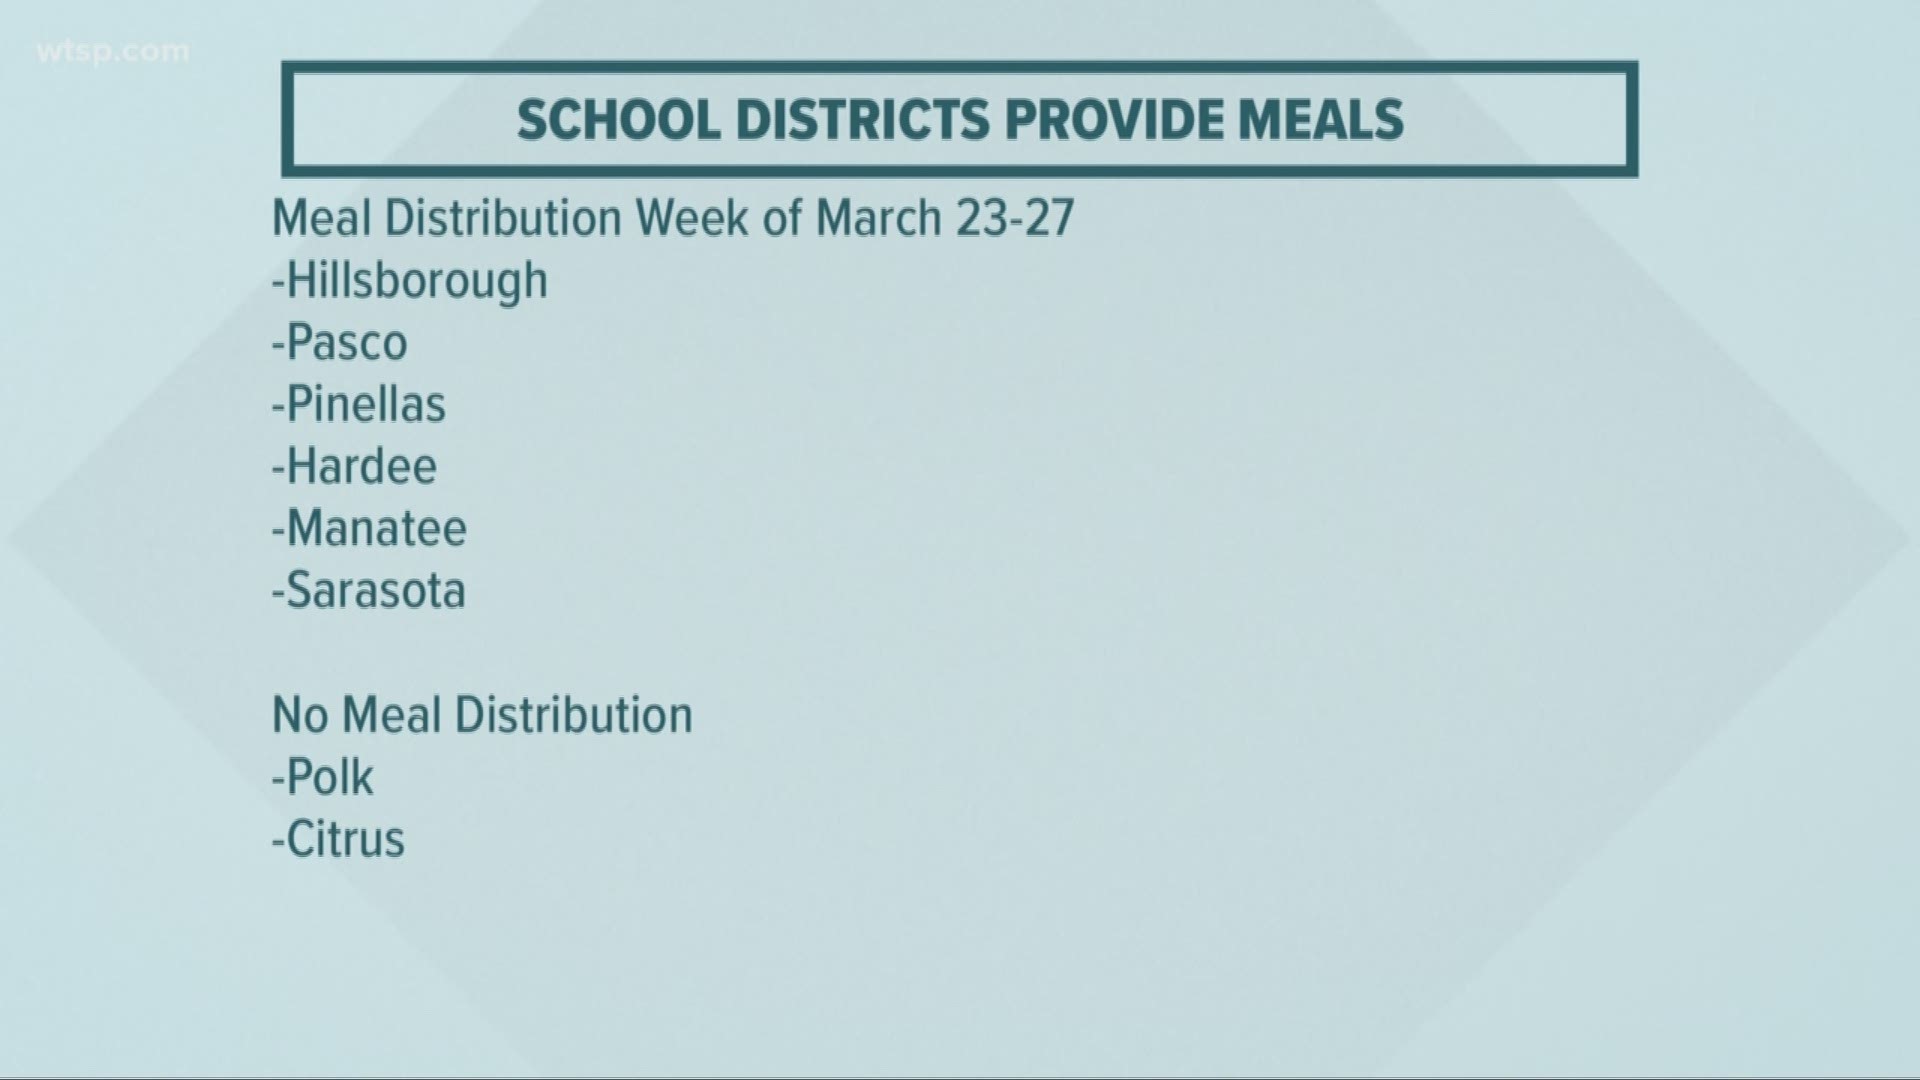 Free meals are available for students under 18 in several Florida counties.